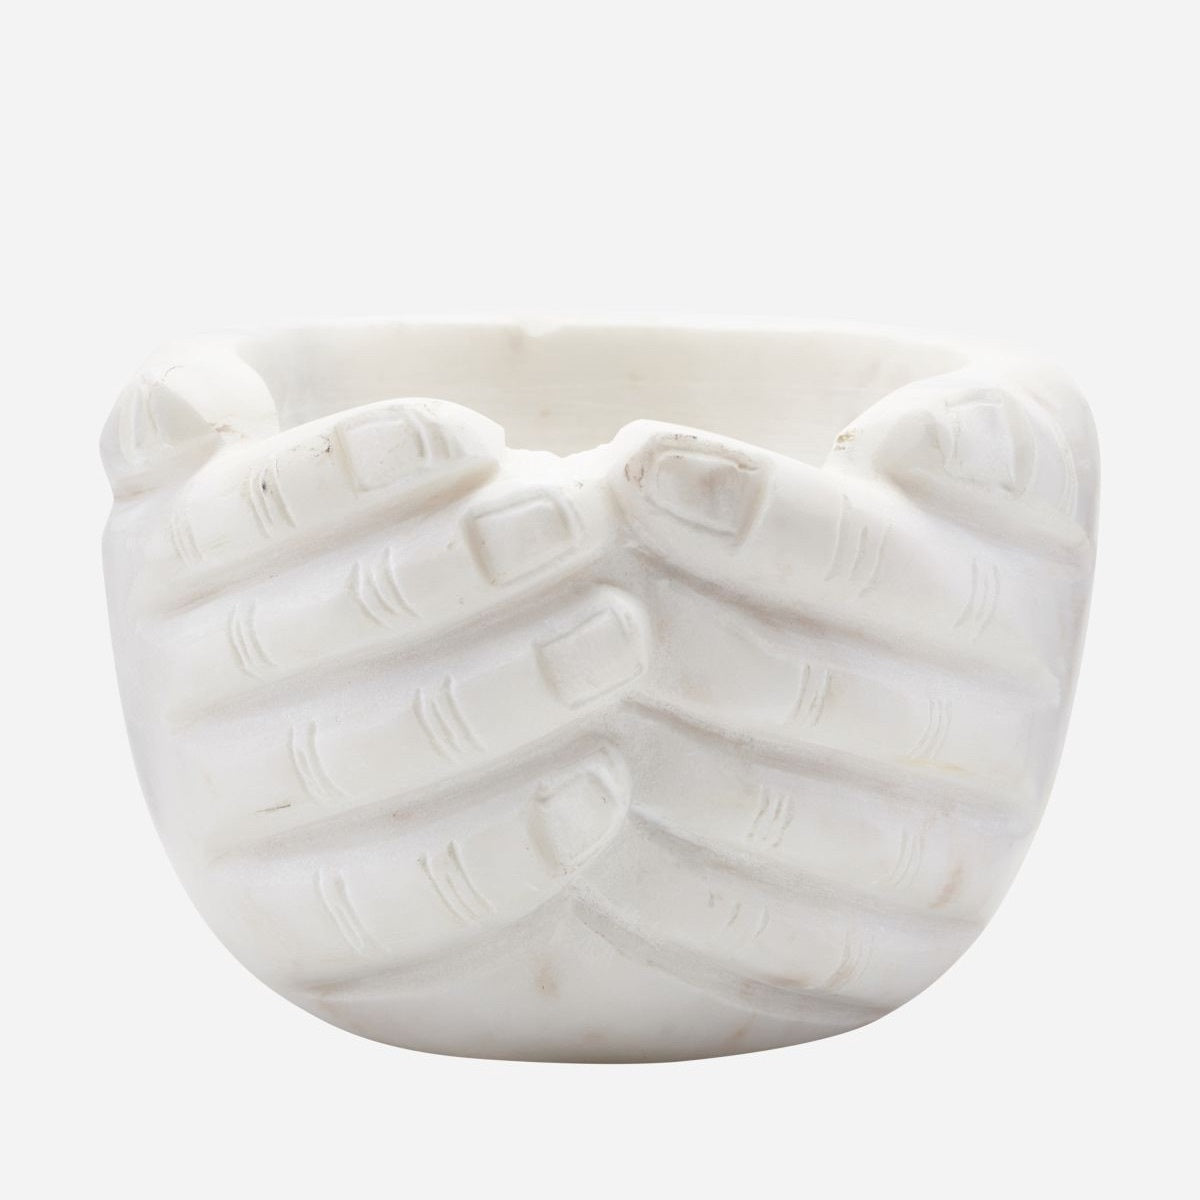 BOWL, HANDS, OFF-WHITE